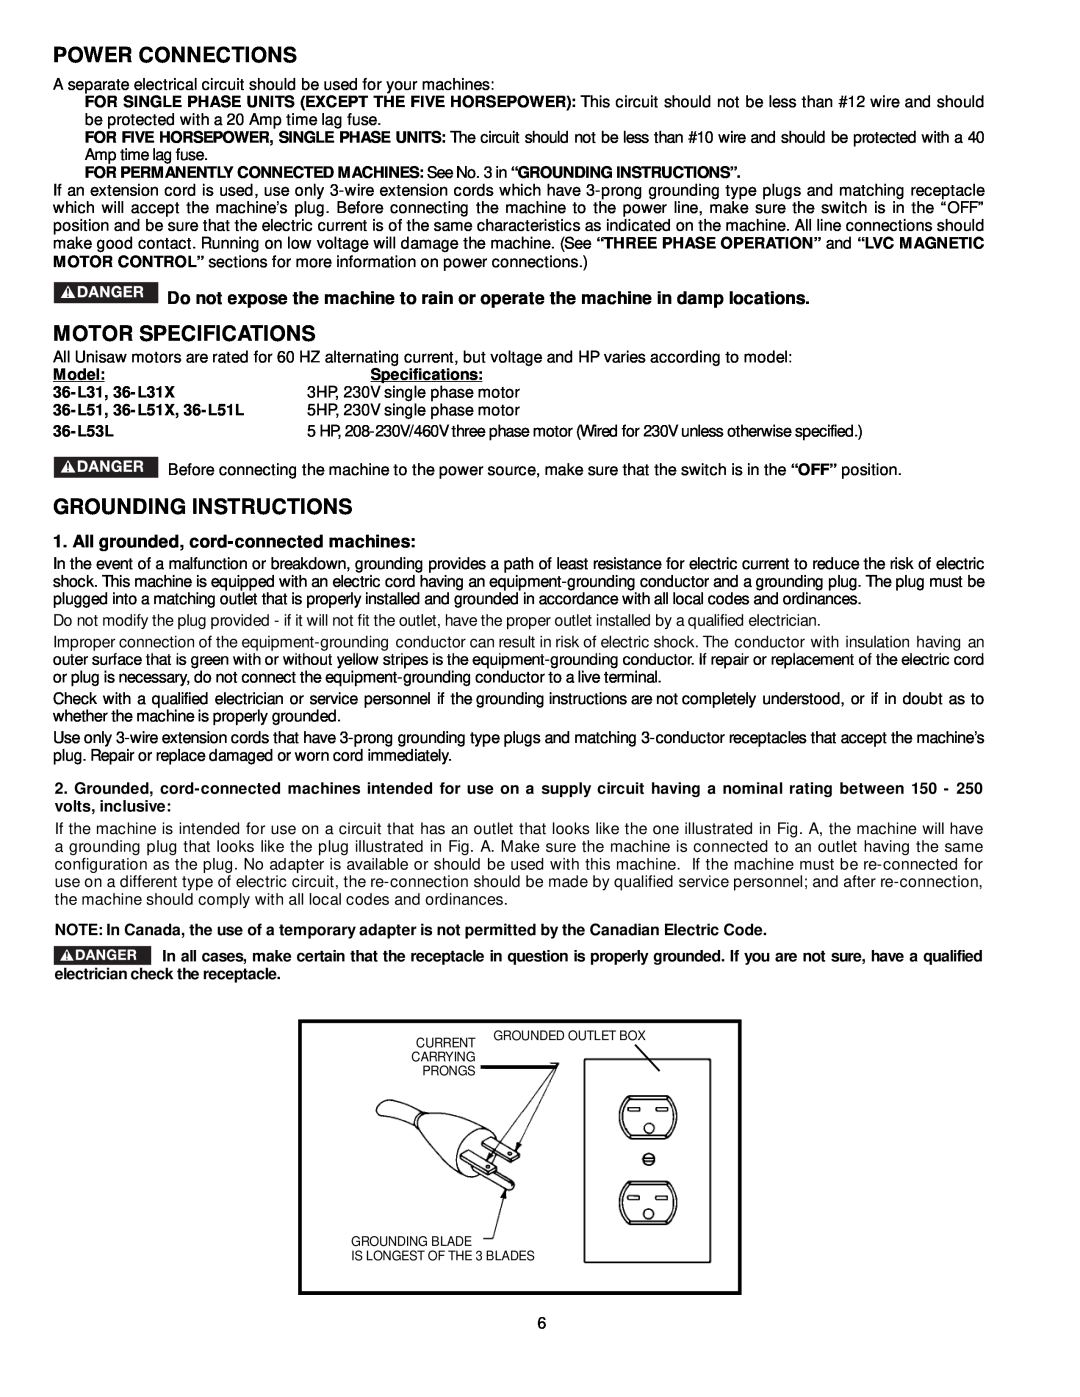 DeWalt 36-L51 Power Connections, Motor Specifications, Grounding Instructions, All grounded, cord-connected machines 